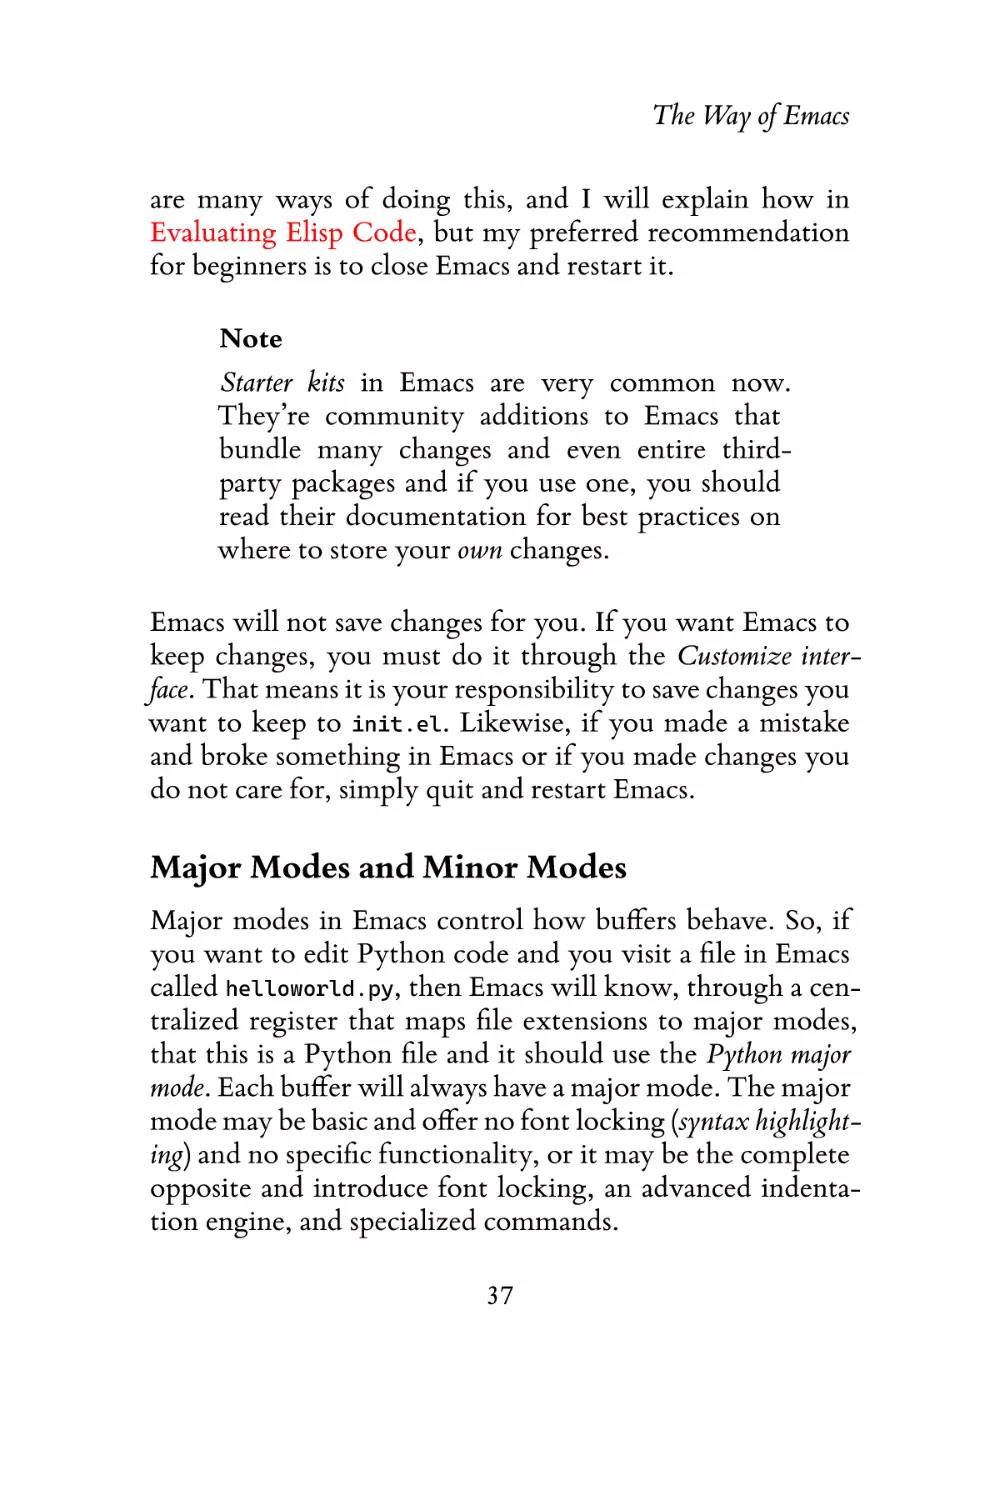 Major Modes and Minor Modes